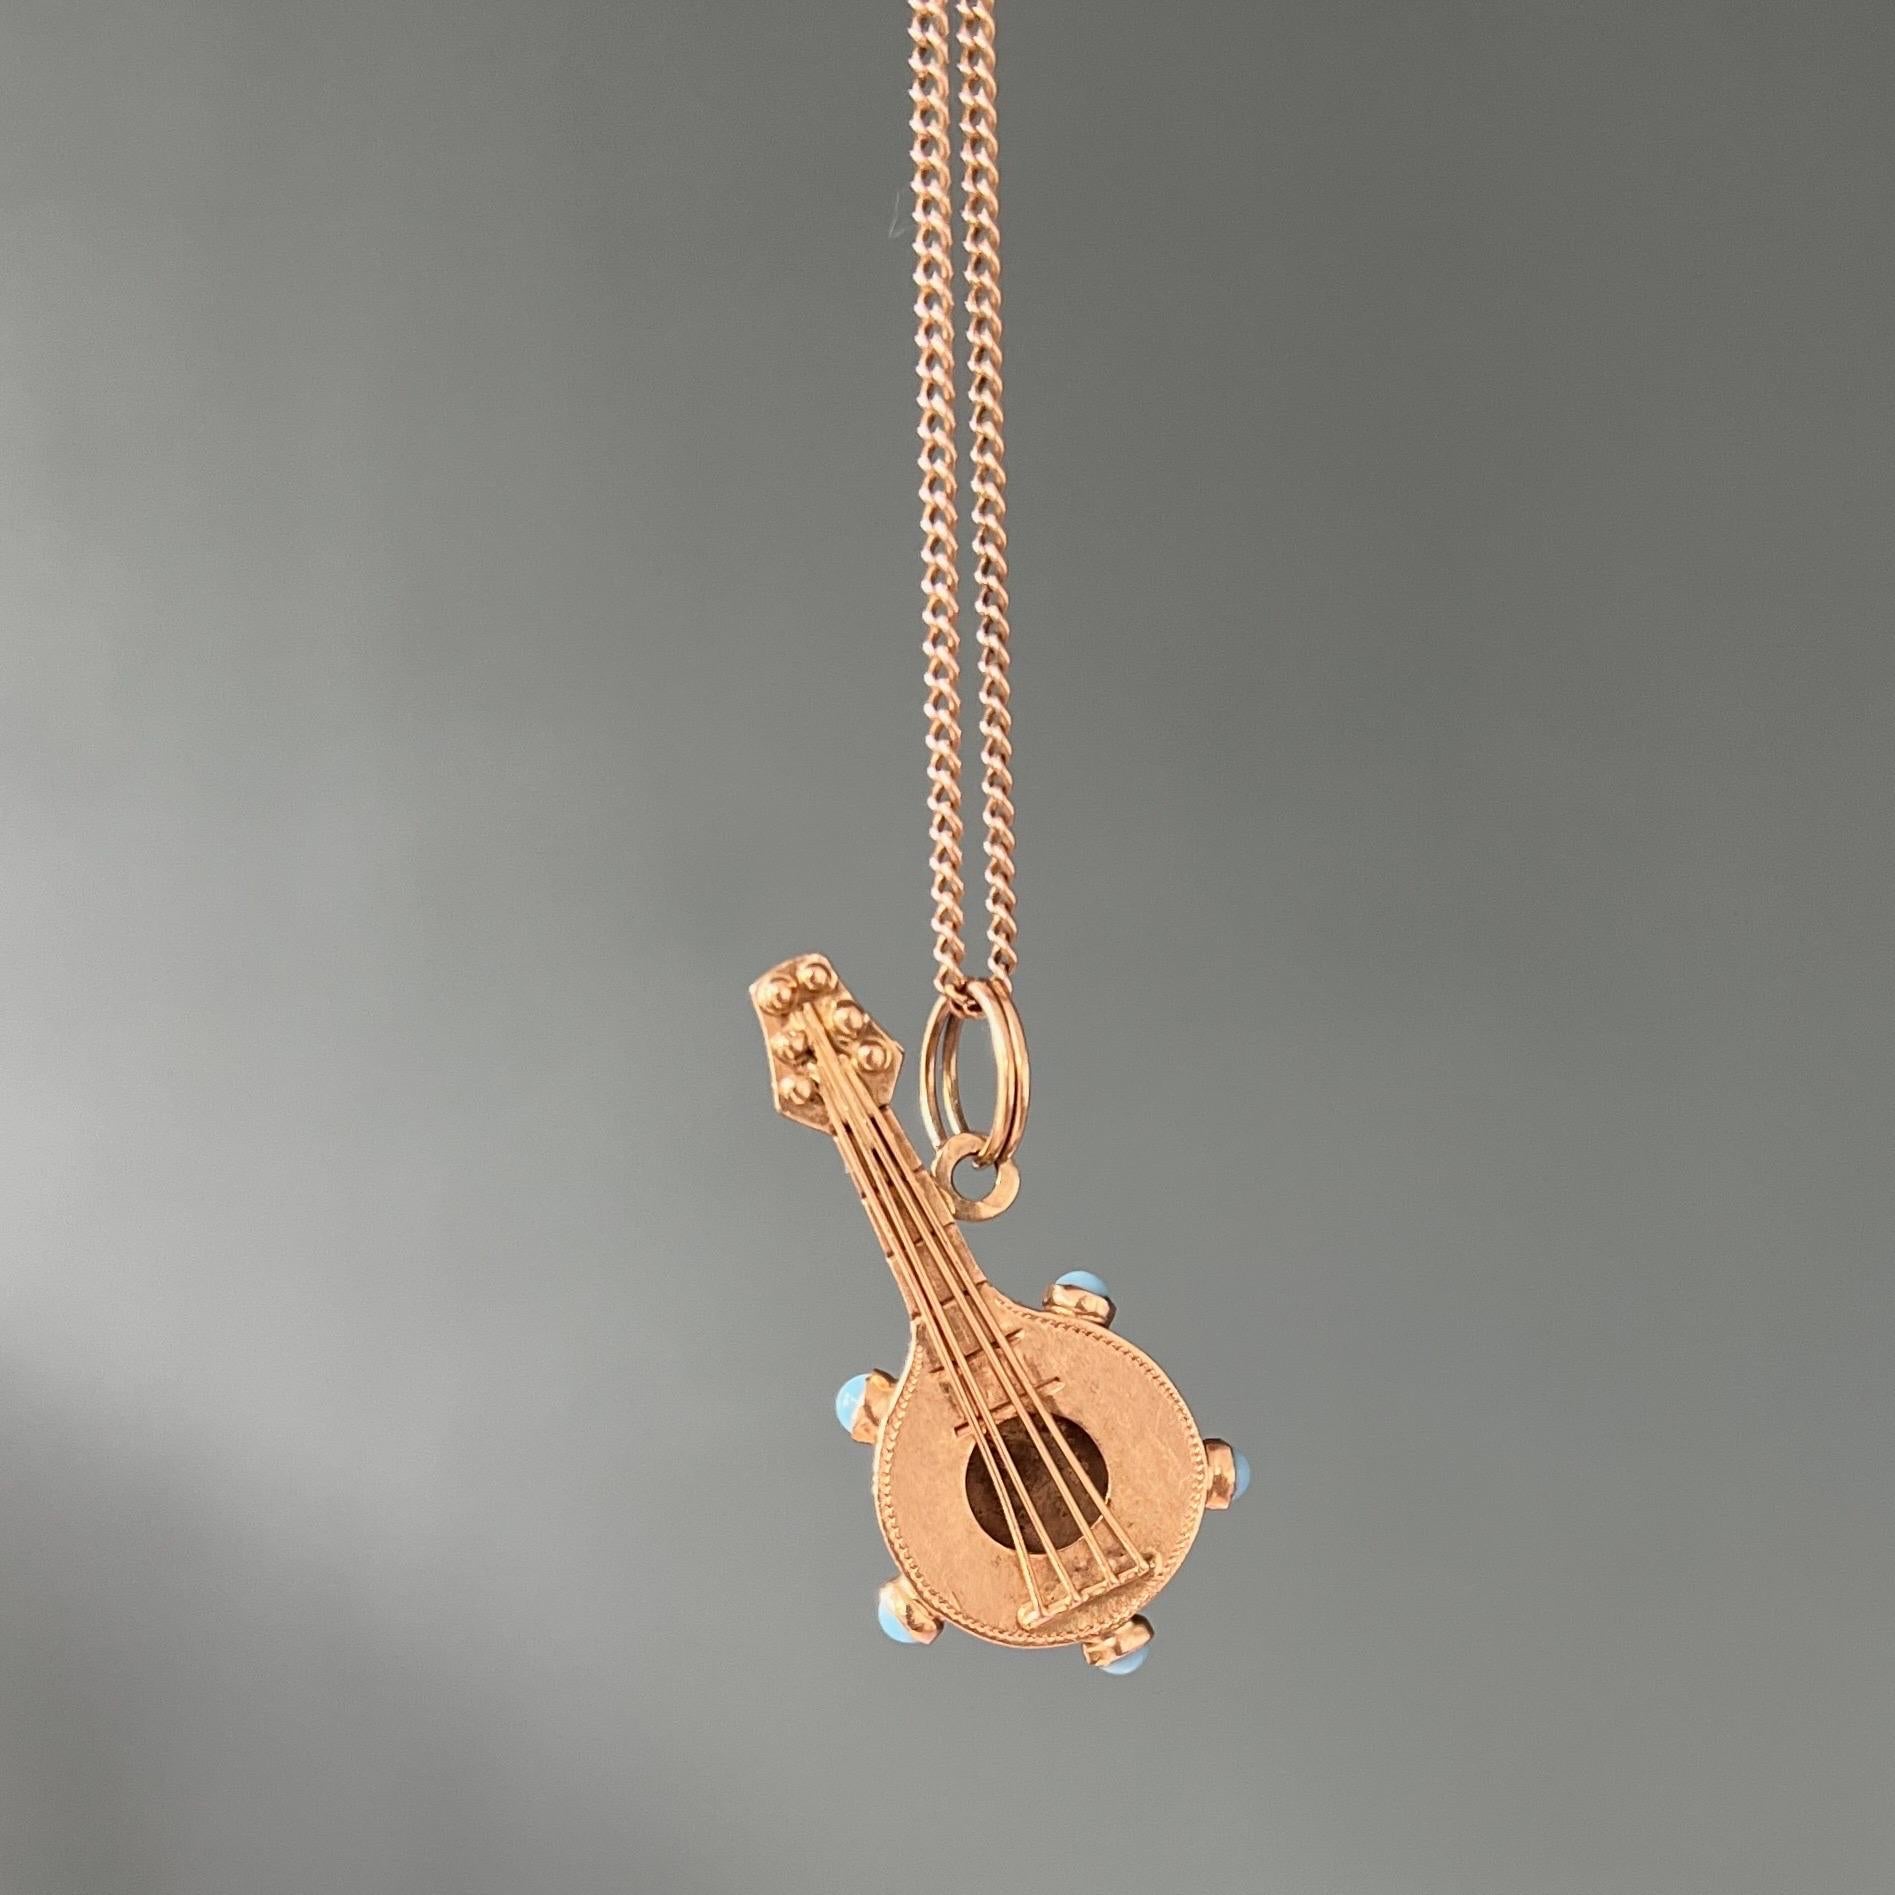 A vintage 18 karat yellow gold mandoline guitar charm pendant. The guitar is nicely crafted and set with five turquoise stones around the body. The mandoline is detailed with four strings and tuners at the top. I can already hear some nice sounds